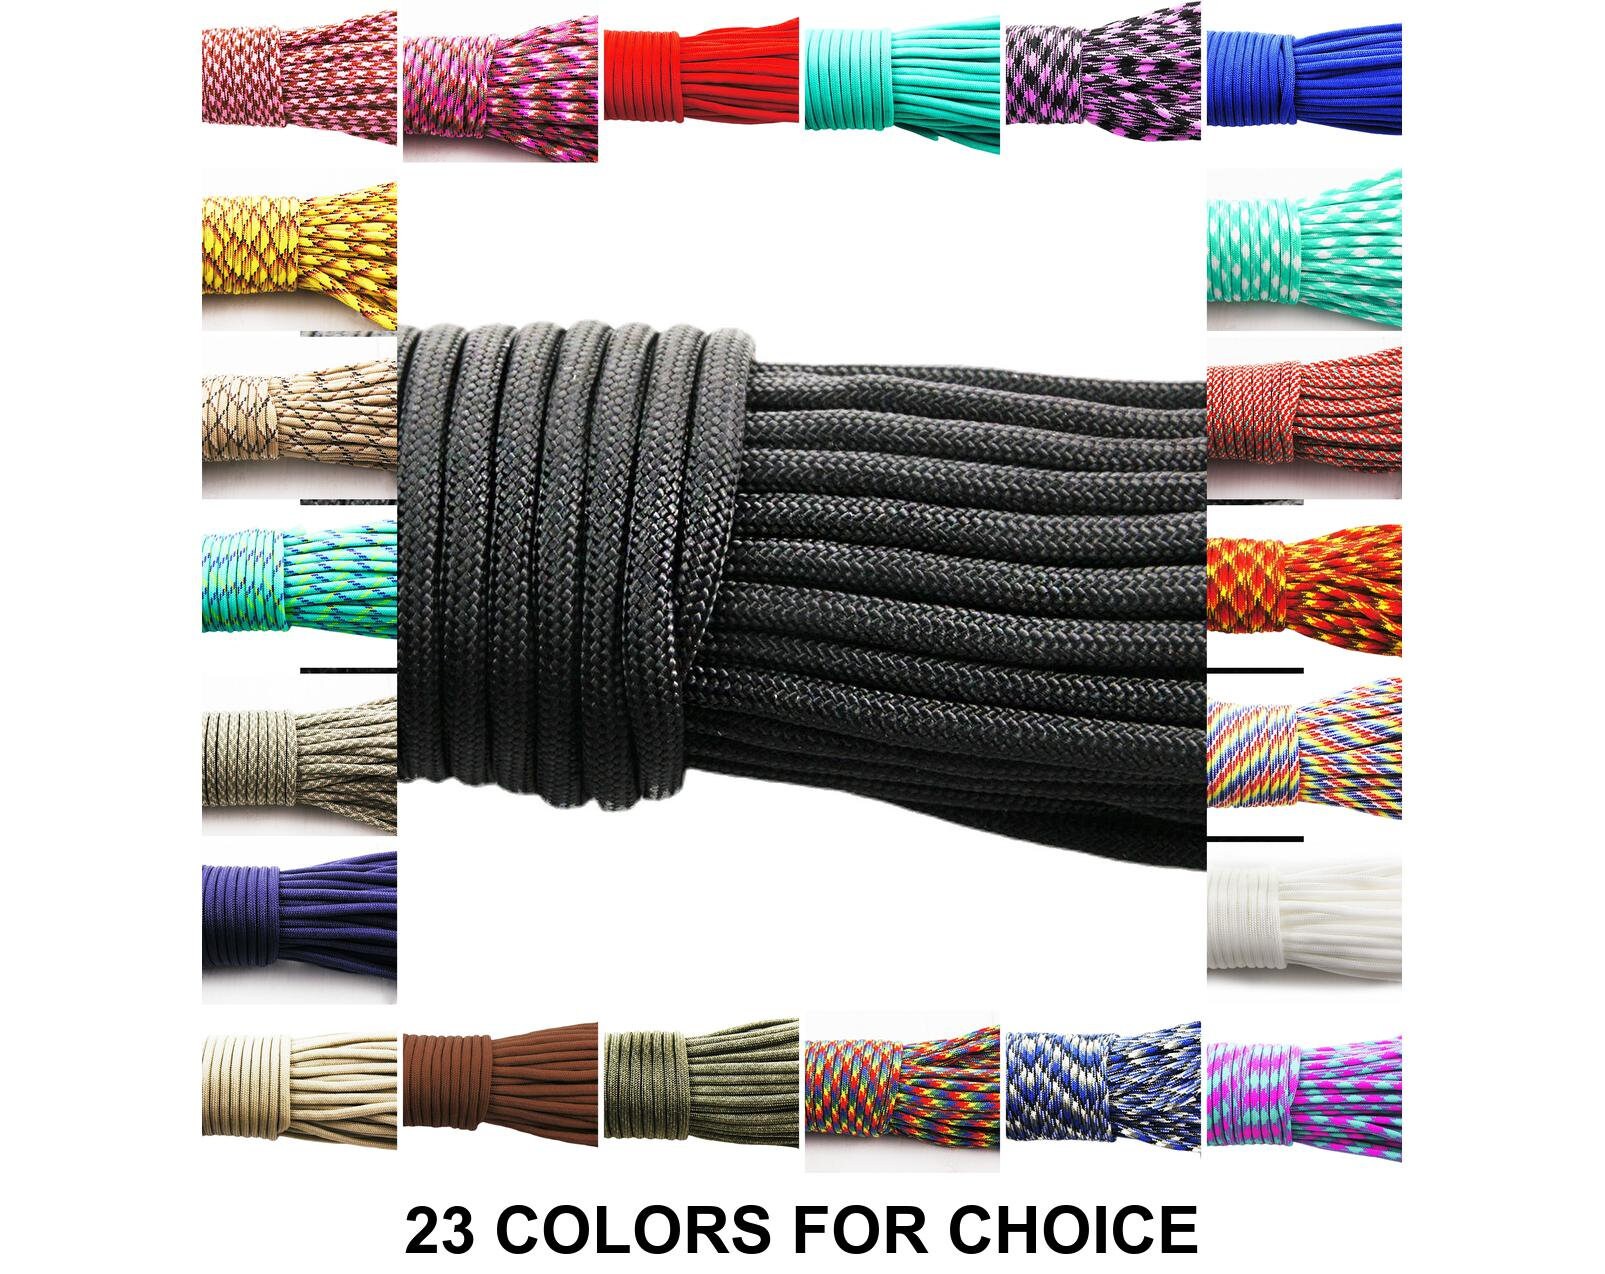 3mm Paracord Rope,cord to Make Survival Bracelet,3mm Macrame Rope